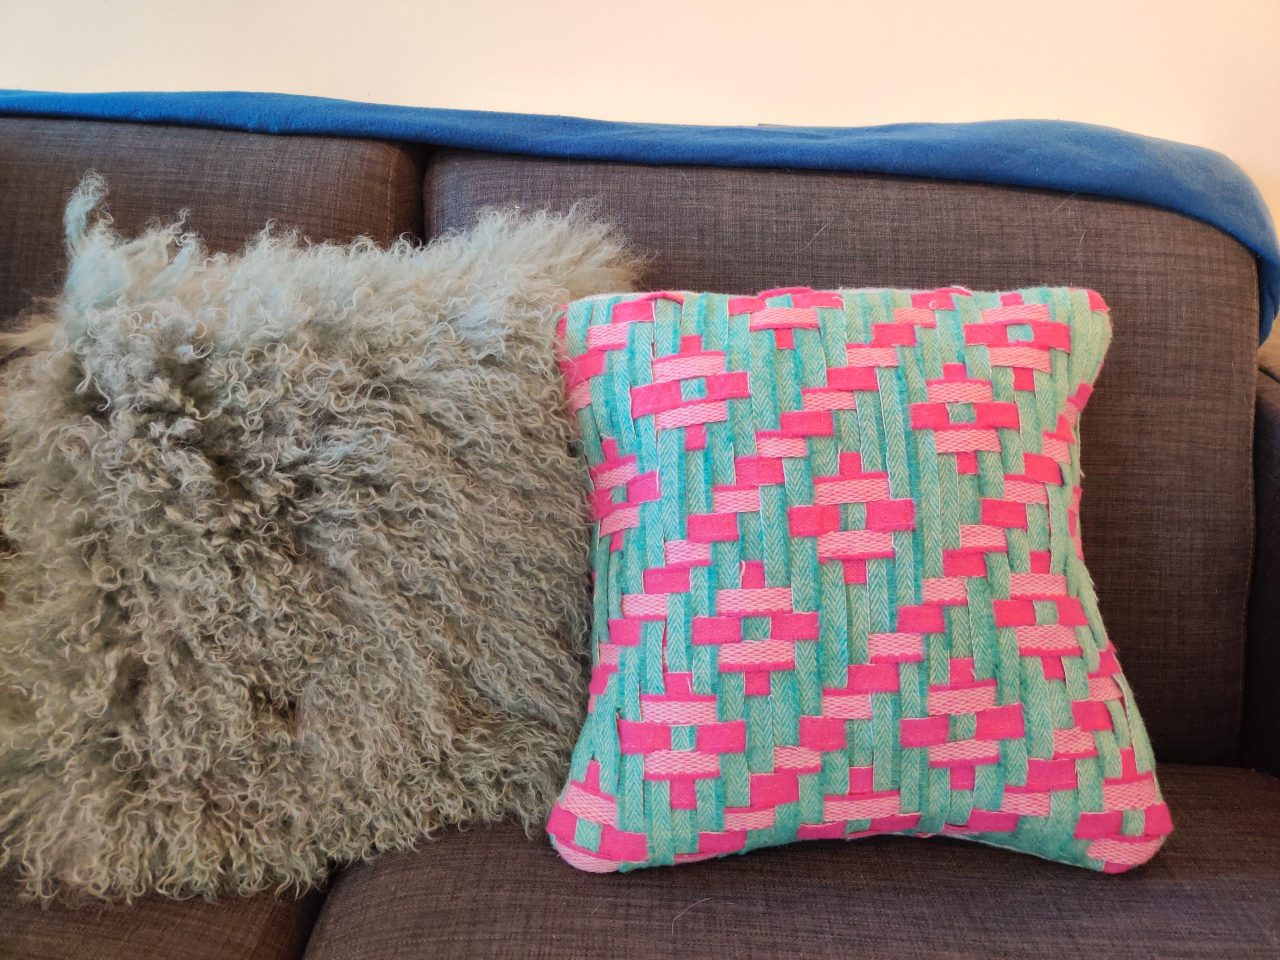 Pink and green complex meshwork cushion